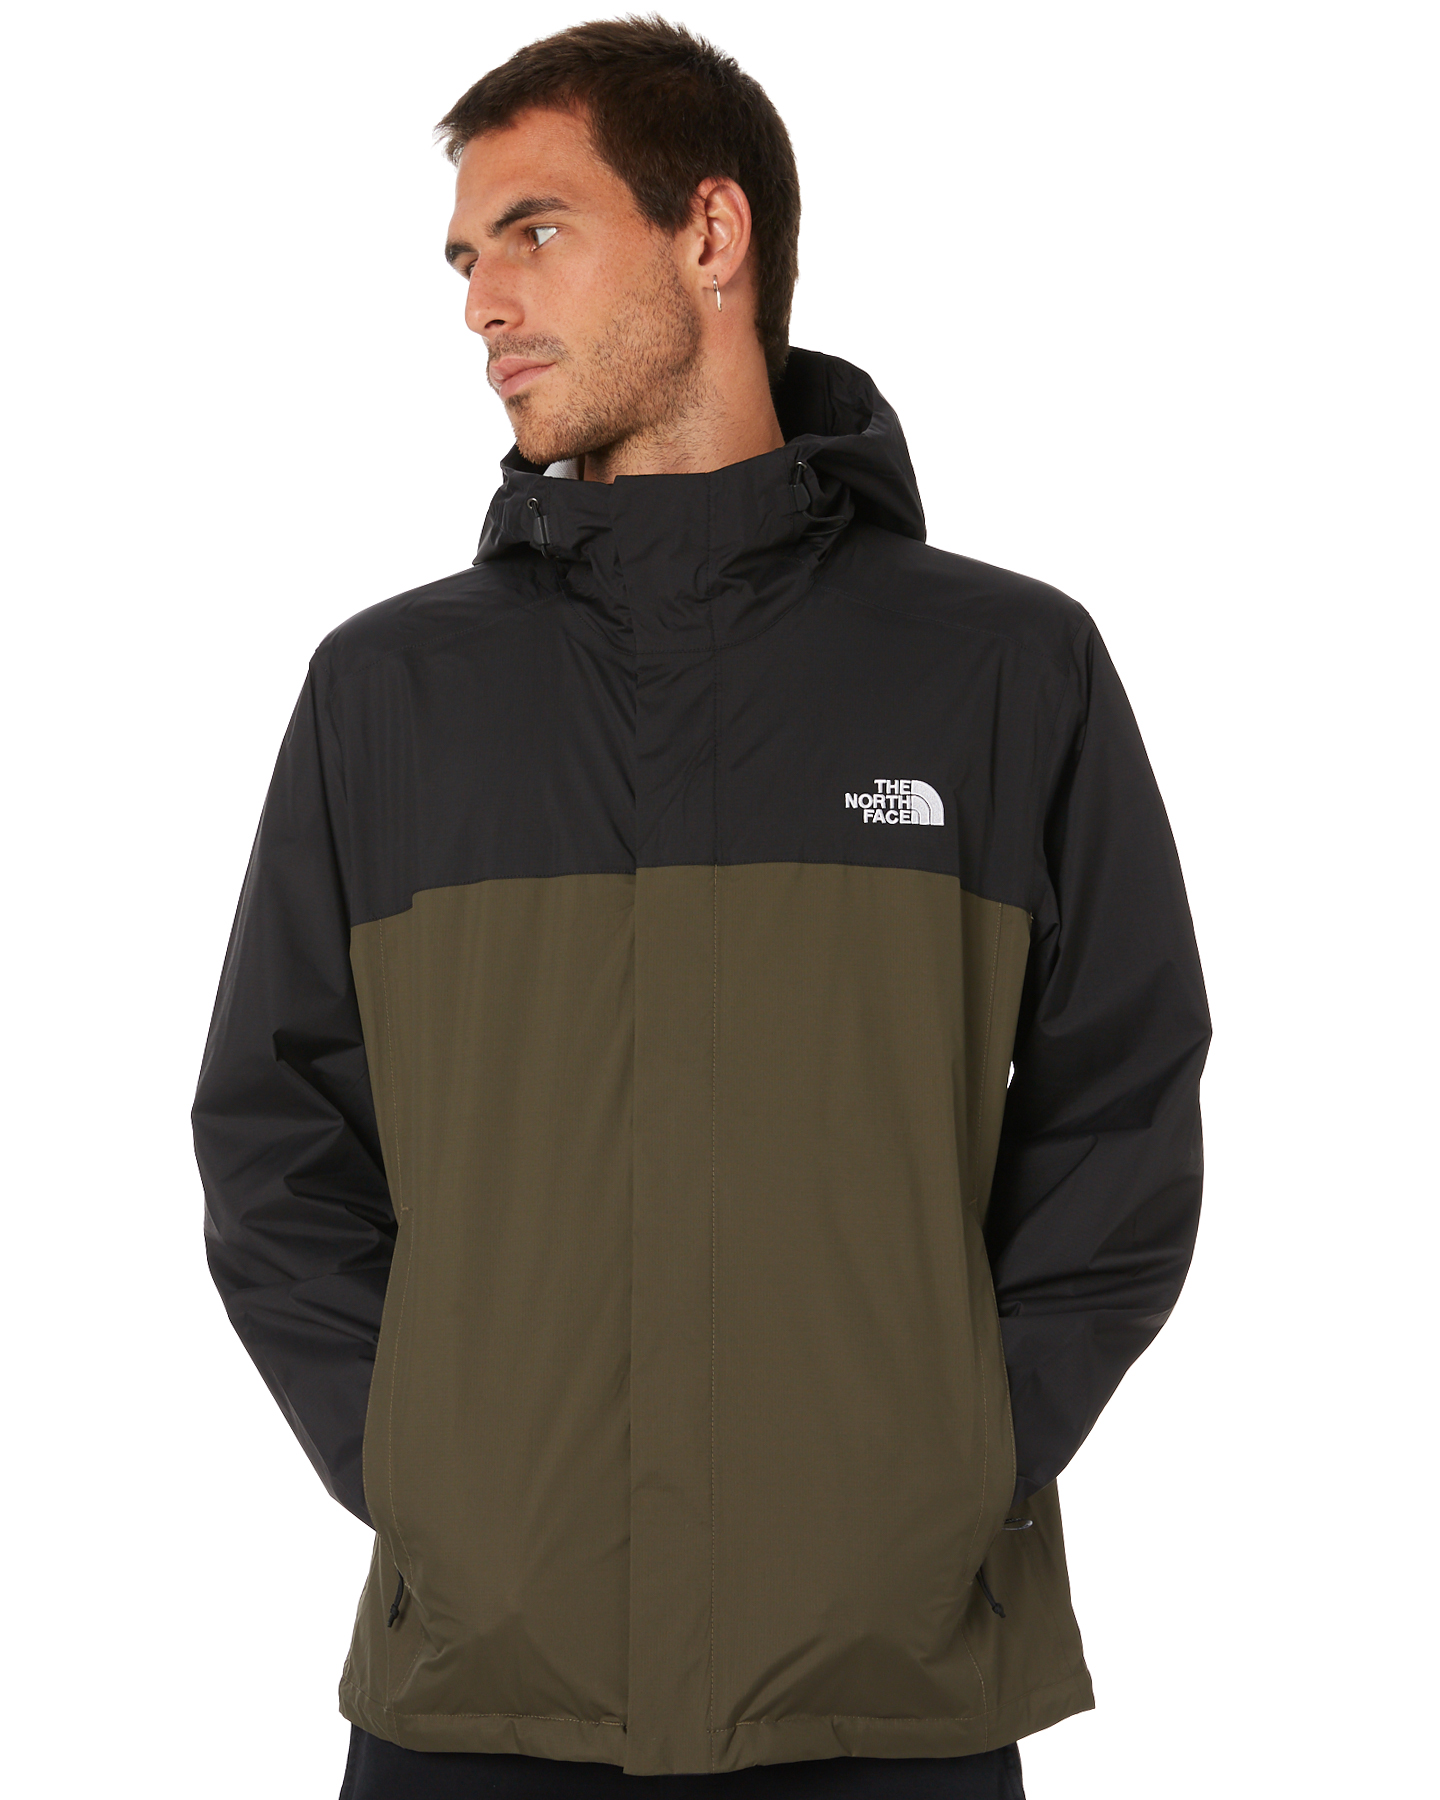 green and black north face coat